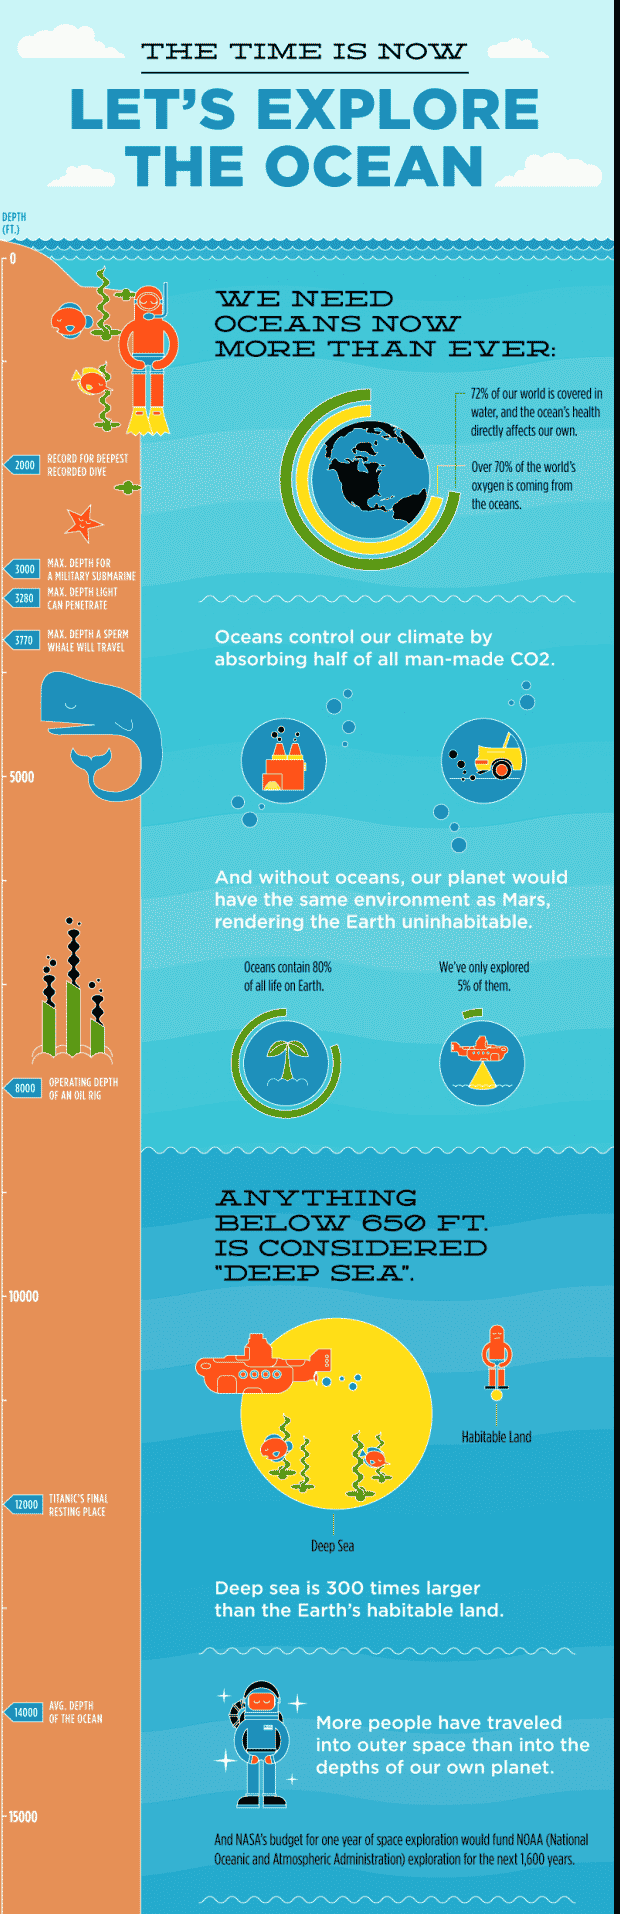 Let’s explore the ocean infographic - Infographic example for science students
